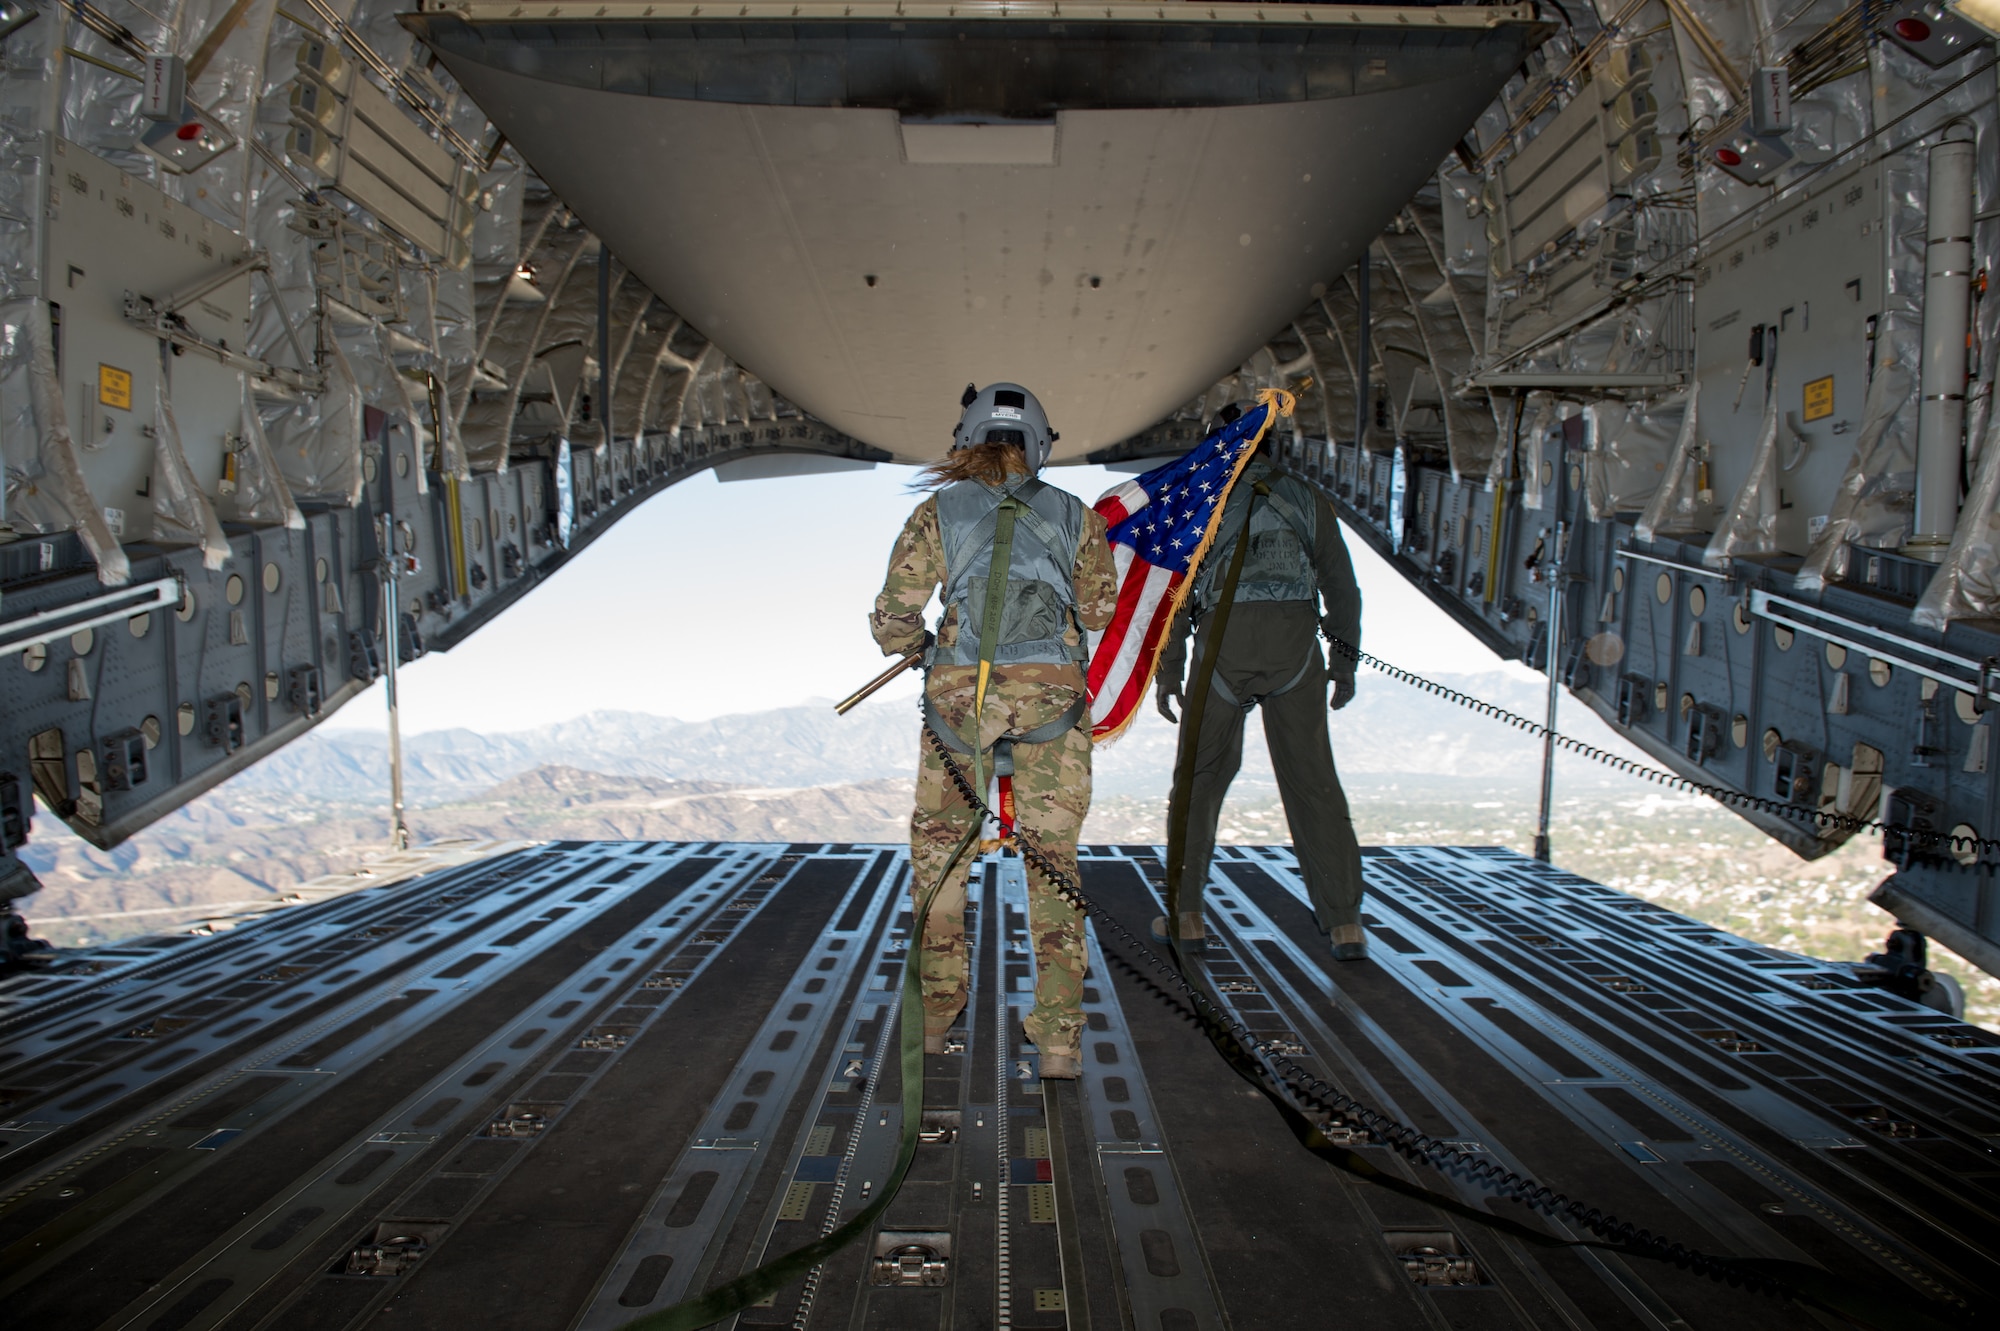 Staff Sgt. Kori Myers, 418th Flight Test Squadron load master, waves the American flag out of the back of a C-17 Globemaster III during the beginning of Game 3 of the National League Championship Series between the L.A. Dodgers and Milwaukee Brewers. The 412th Test Wing at Edwards Air Force Base, California, provided the C-17 for the ceremonial flyover. (U.S. Air Force photo by Kyle Larson)